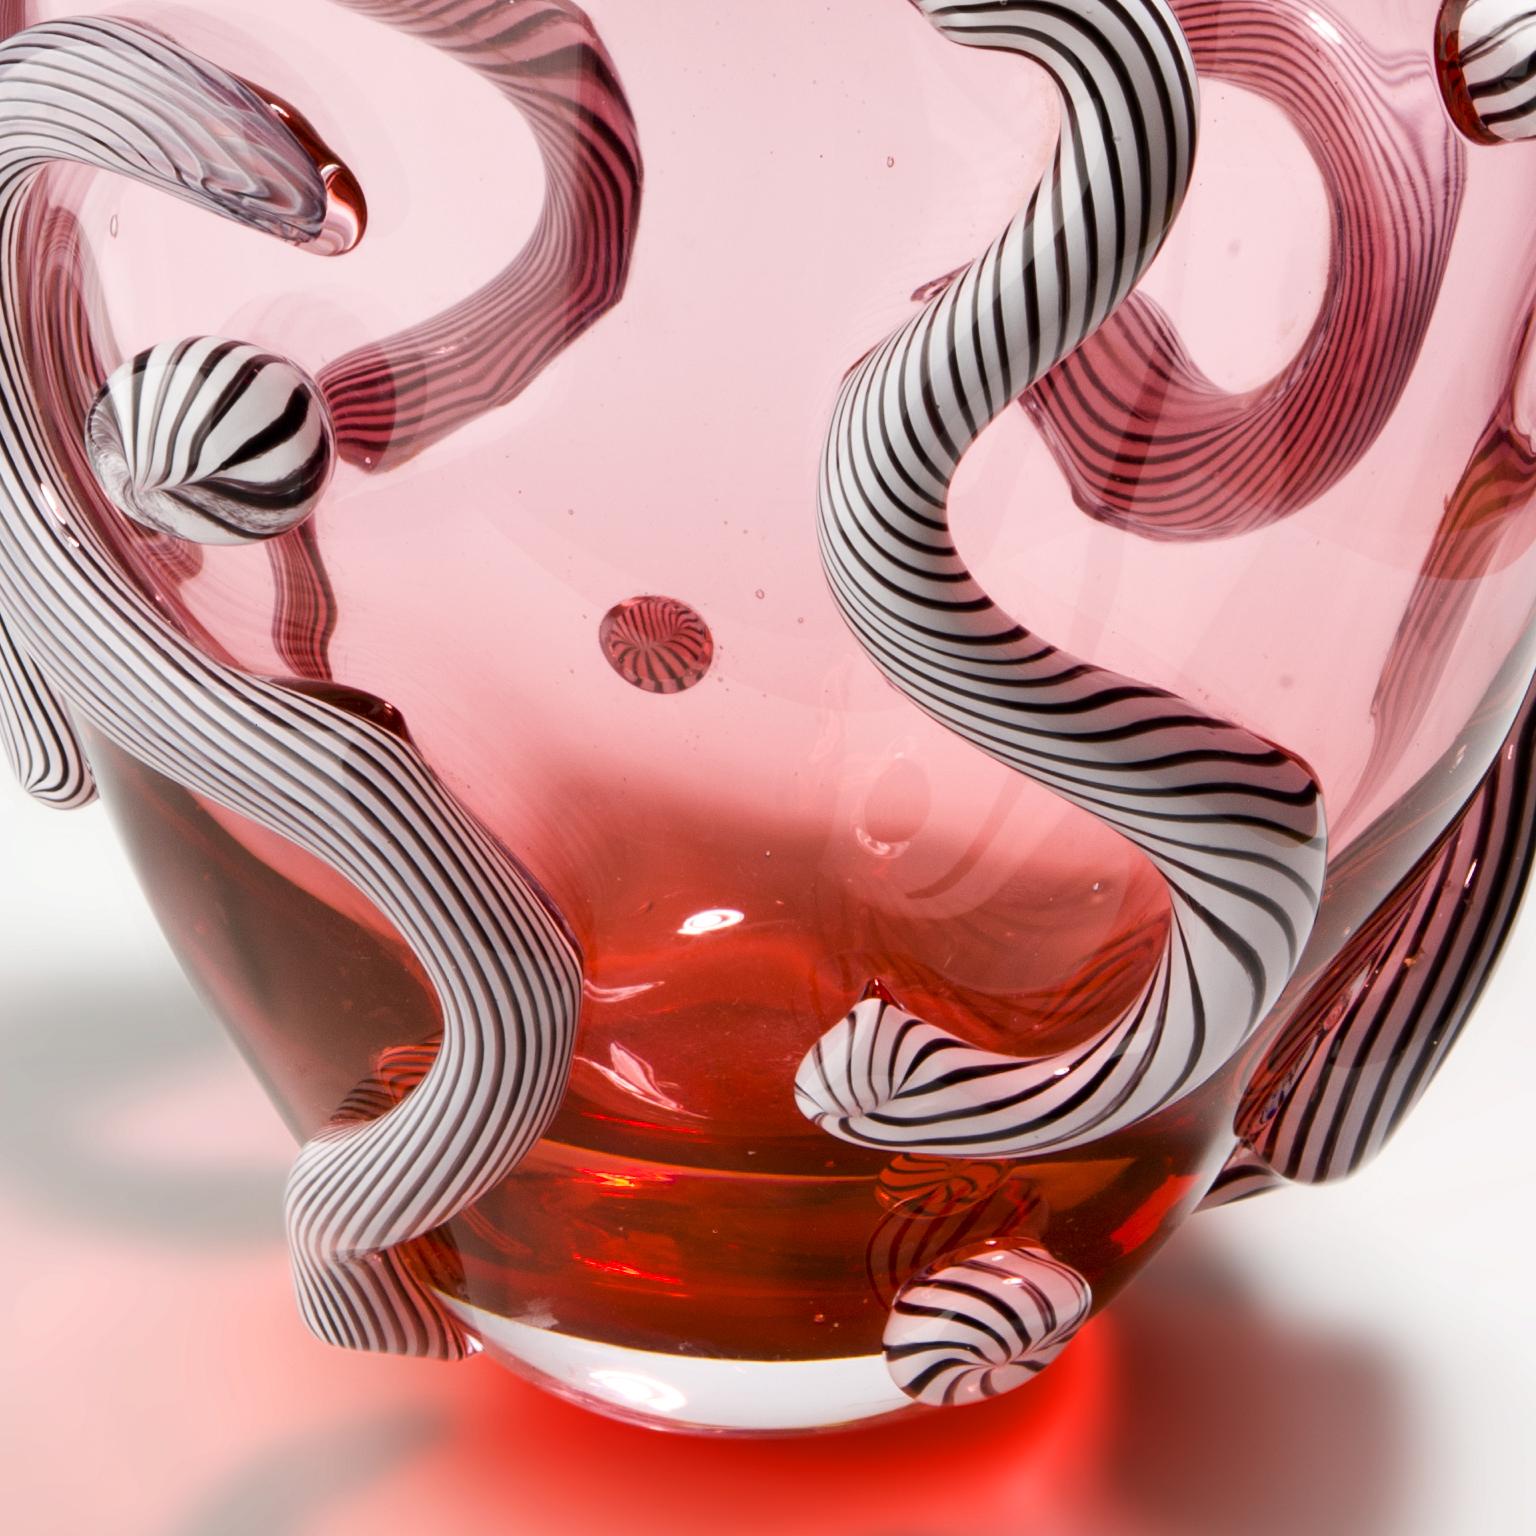 Pink hand blown glass object with black and white striped curls attached. Hand blown in Amsterdam.